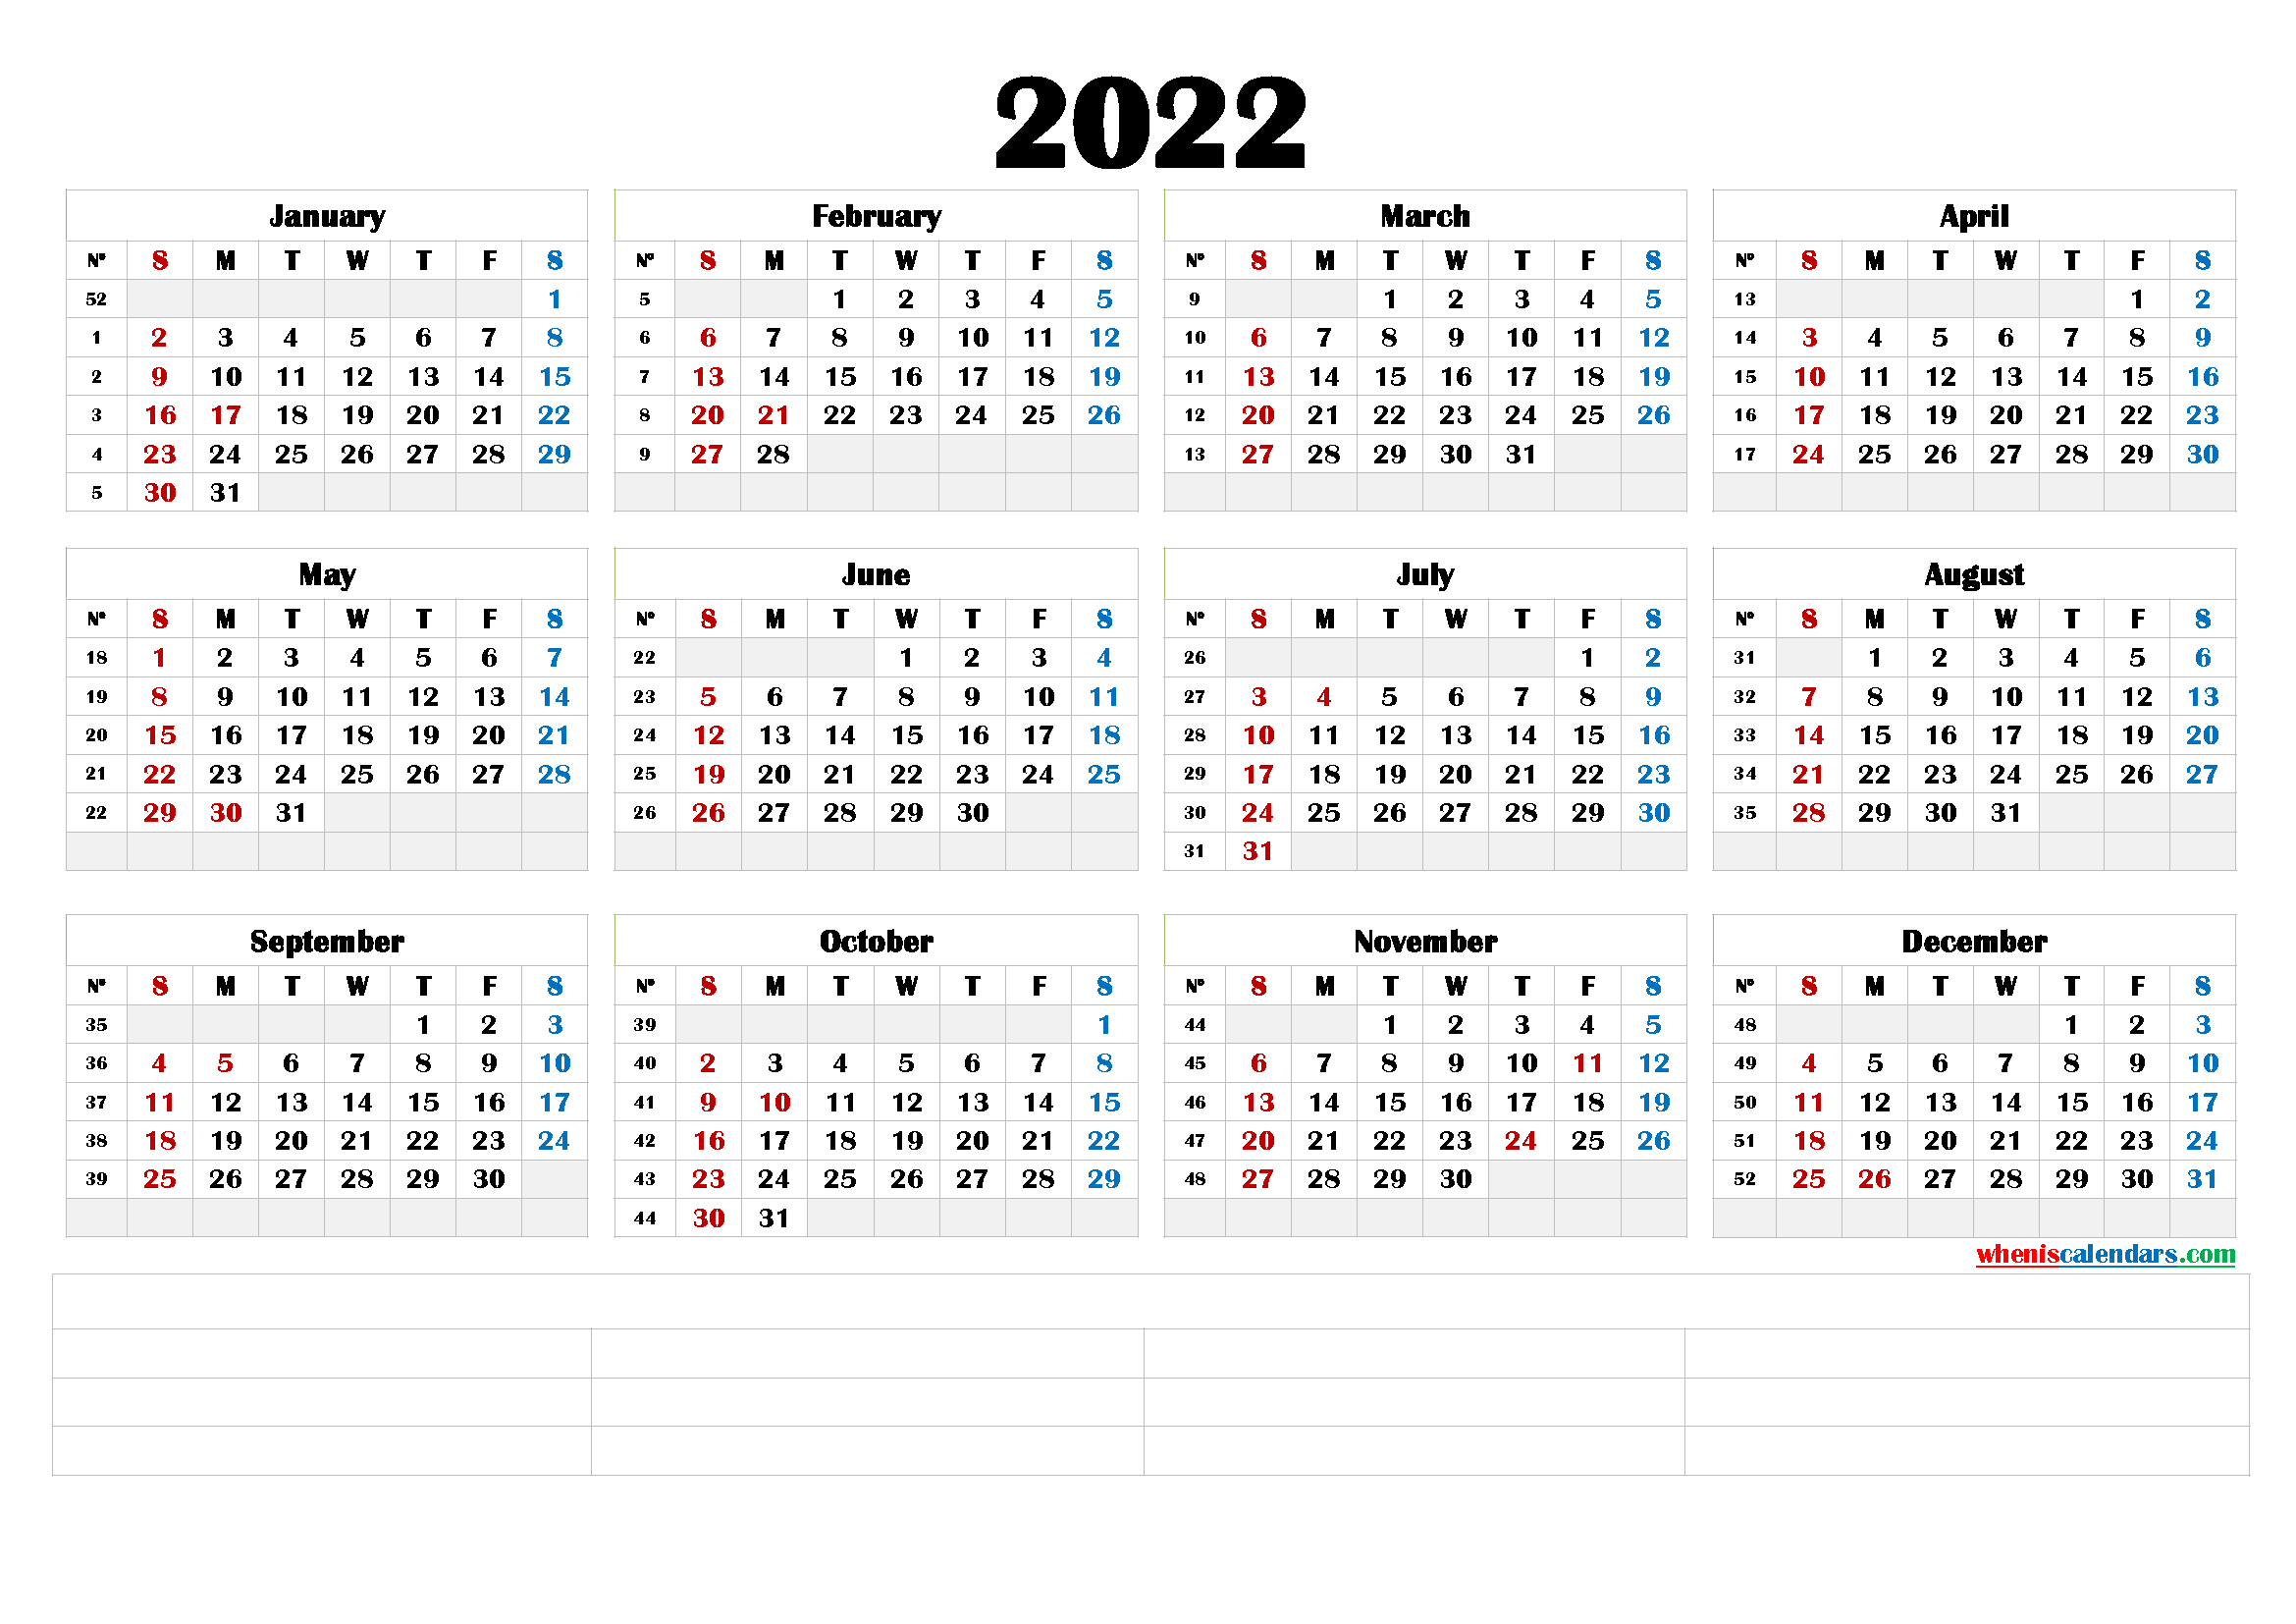 new date sites 2022